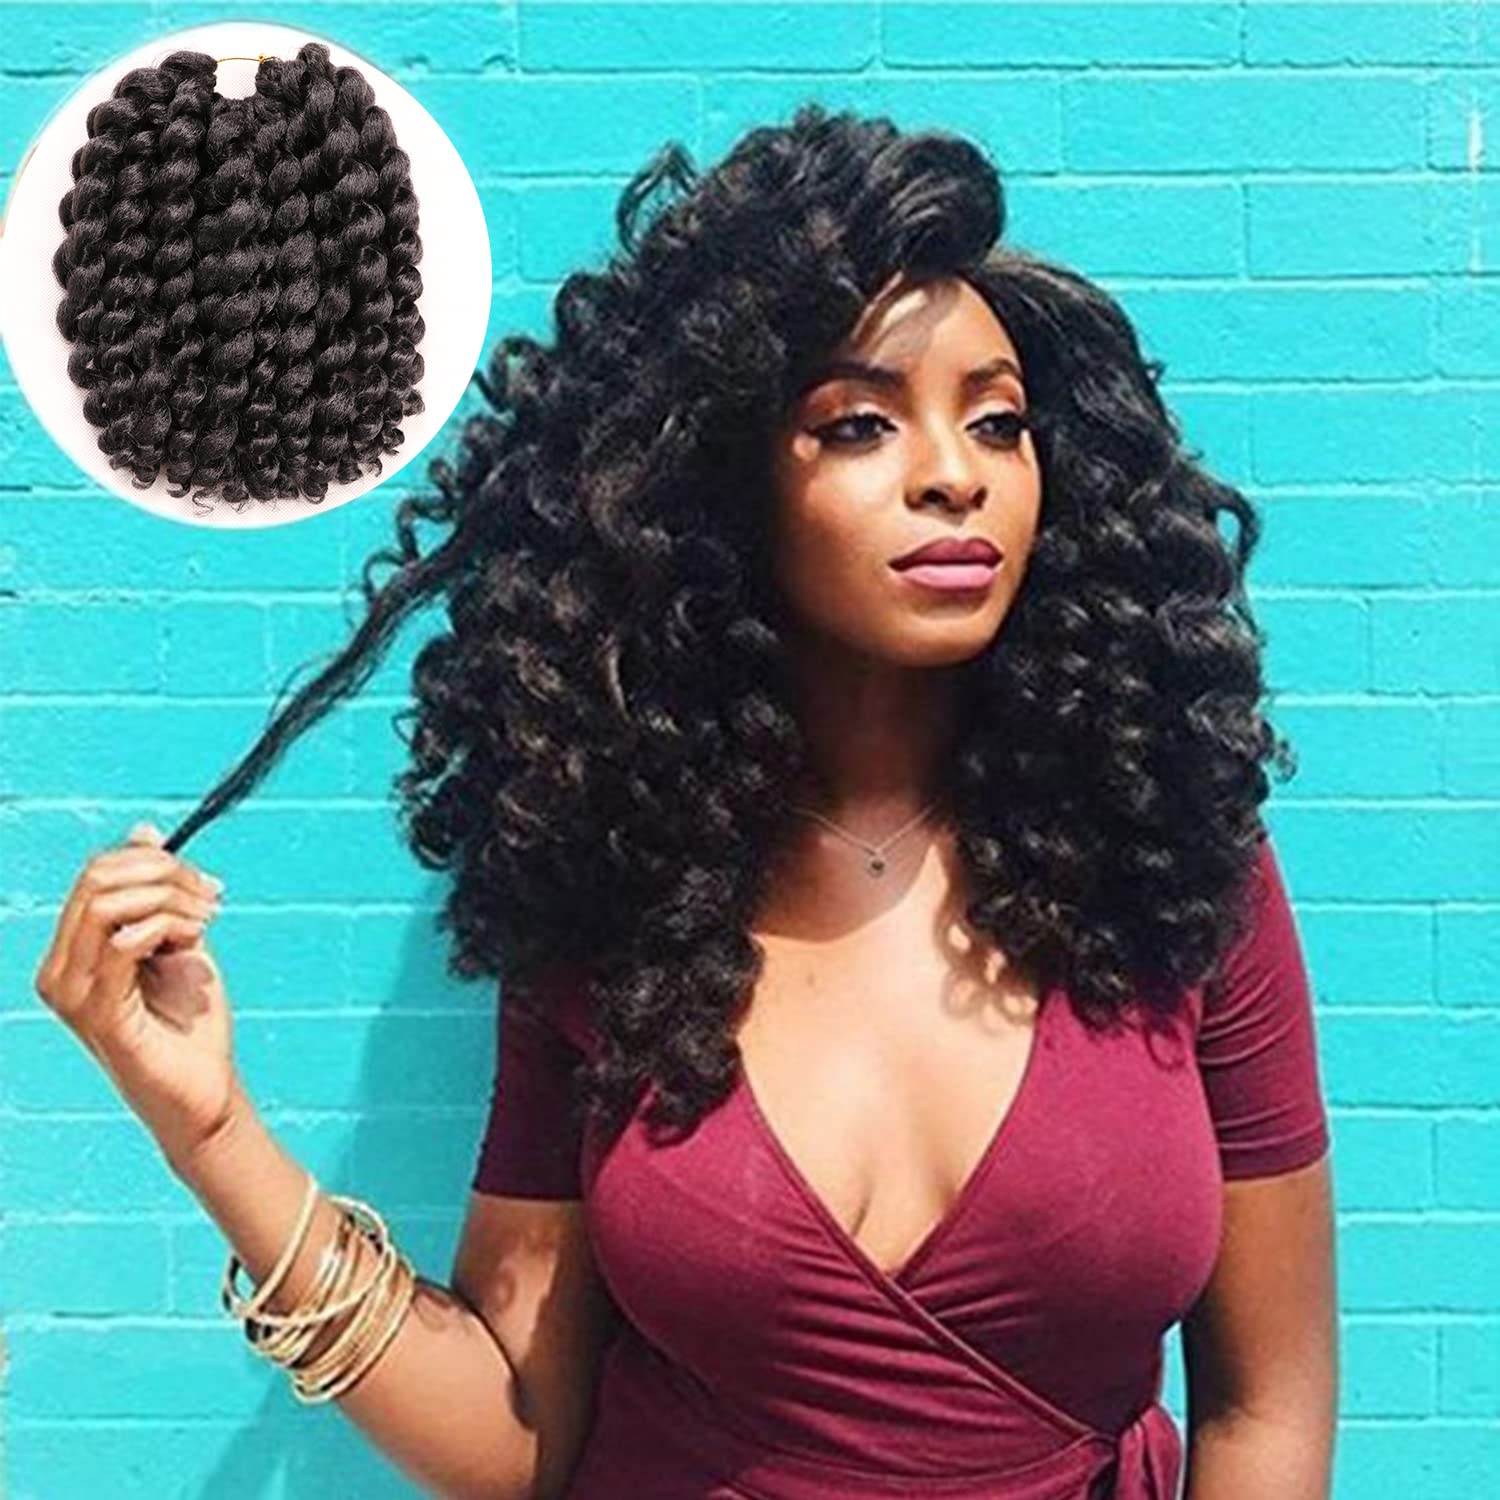 10 Inch 22 Strands 4 Packs Jumpy Wand Curls Crochet Hair Jamaican Bounce  Crochet Hair Curly Crochet Braids Curly Crochet Hair Crochet Braiding Hair  (10 Inch (Pack of 4), #1B) 10 Inch (Pack of 4) #1B